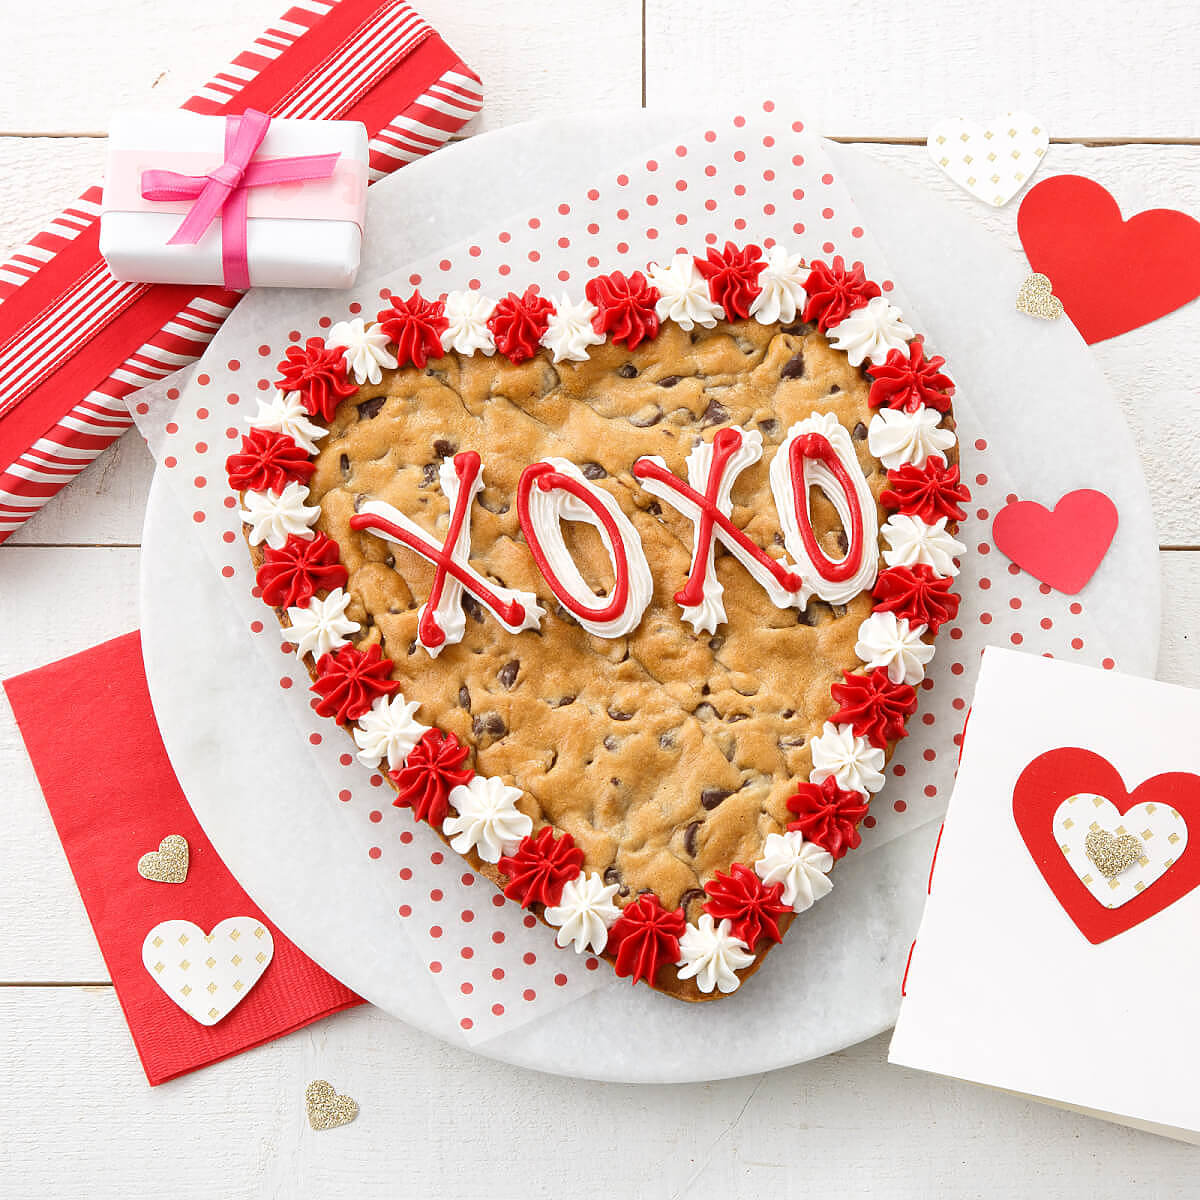 Red and white frosting saying XOXO on a heart shaped cookie cake